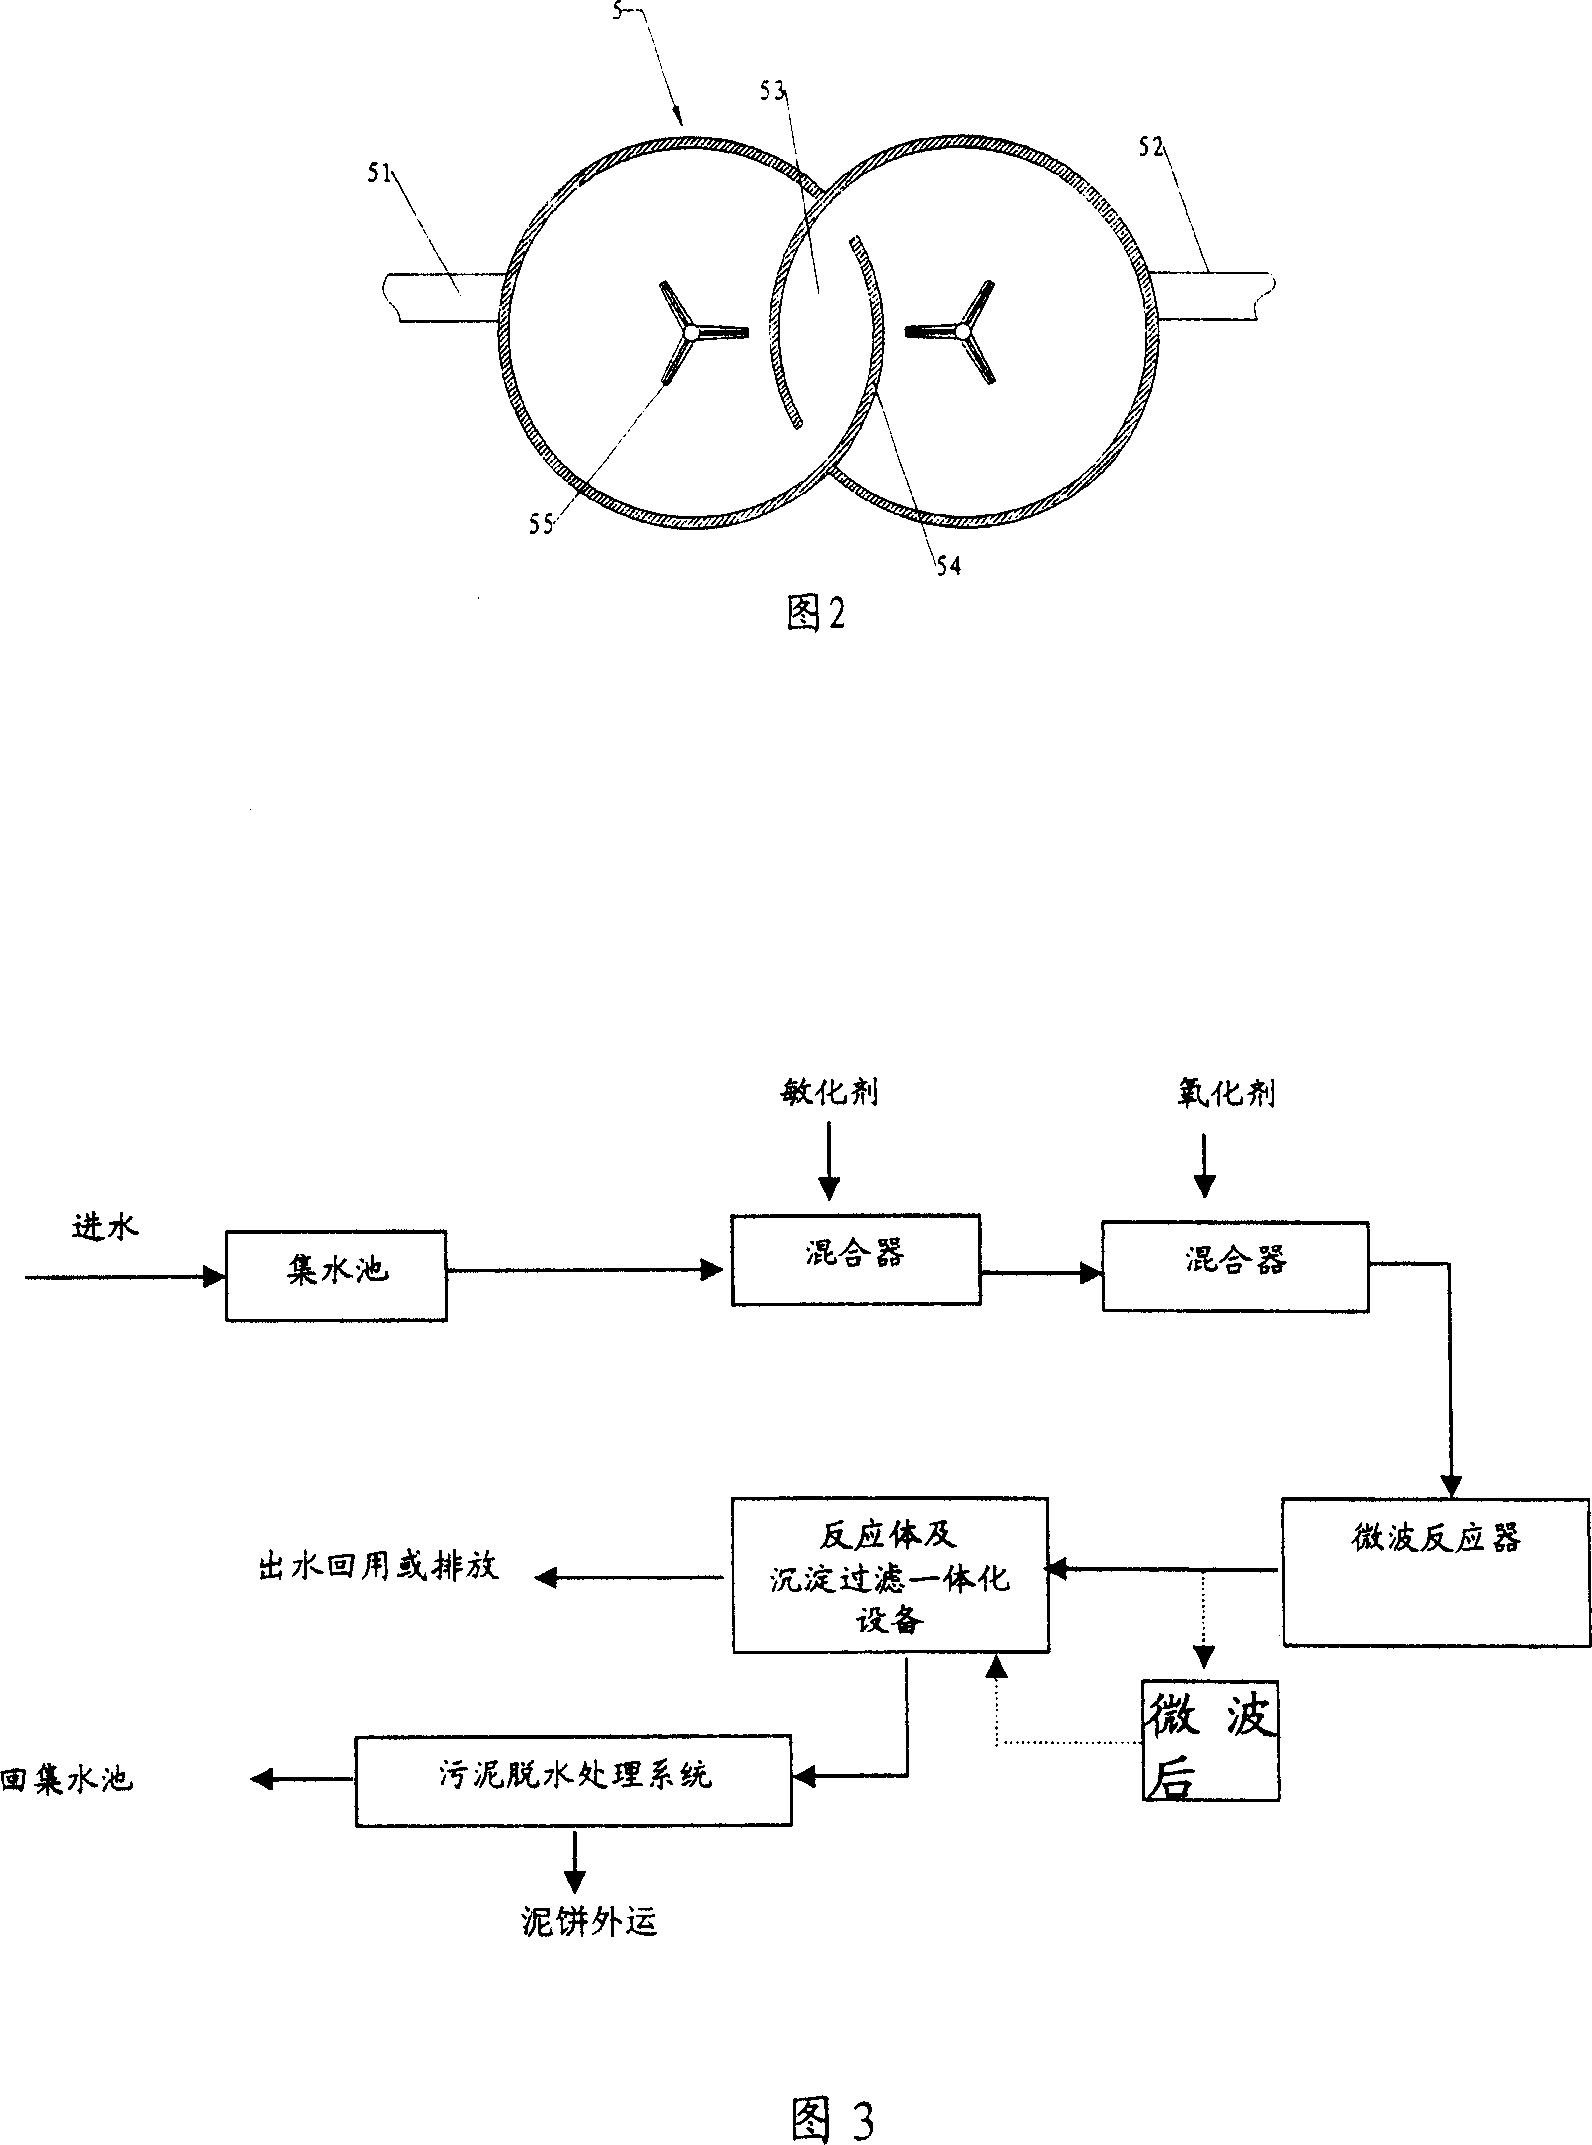 Method for processing sewage by microwave chemistry and corresponding system